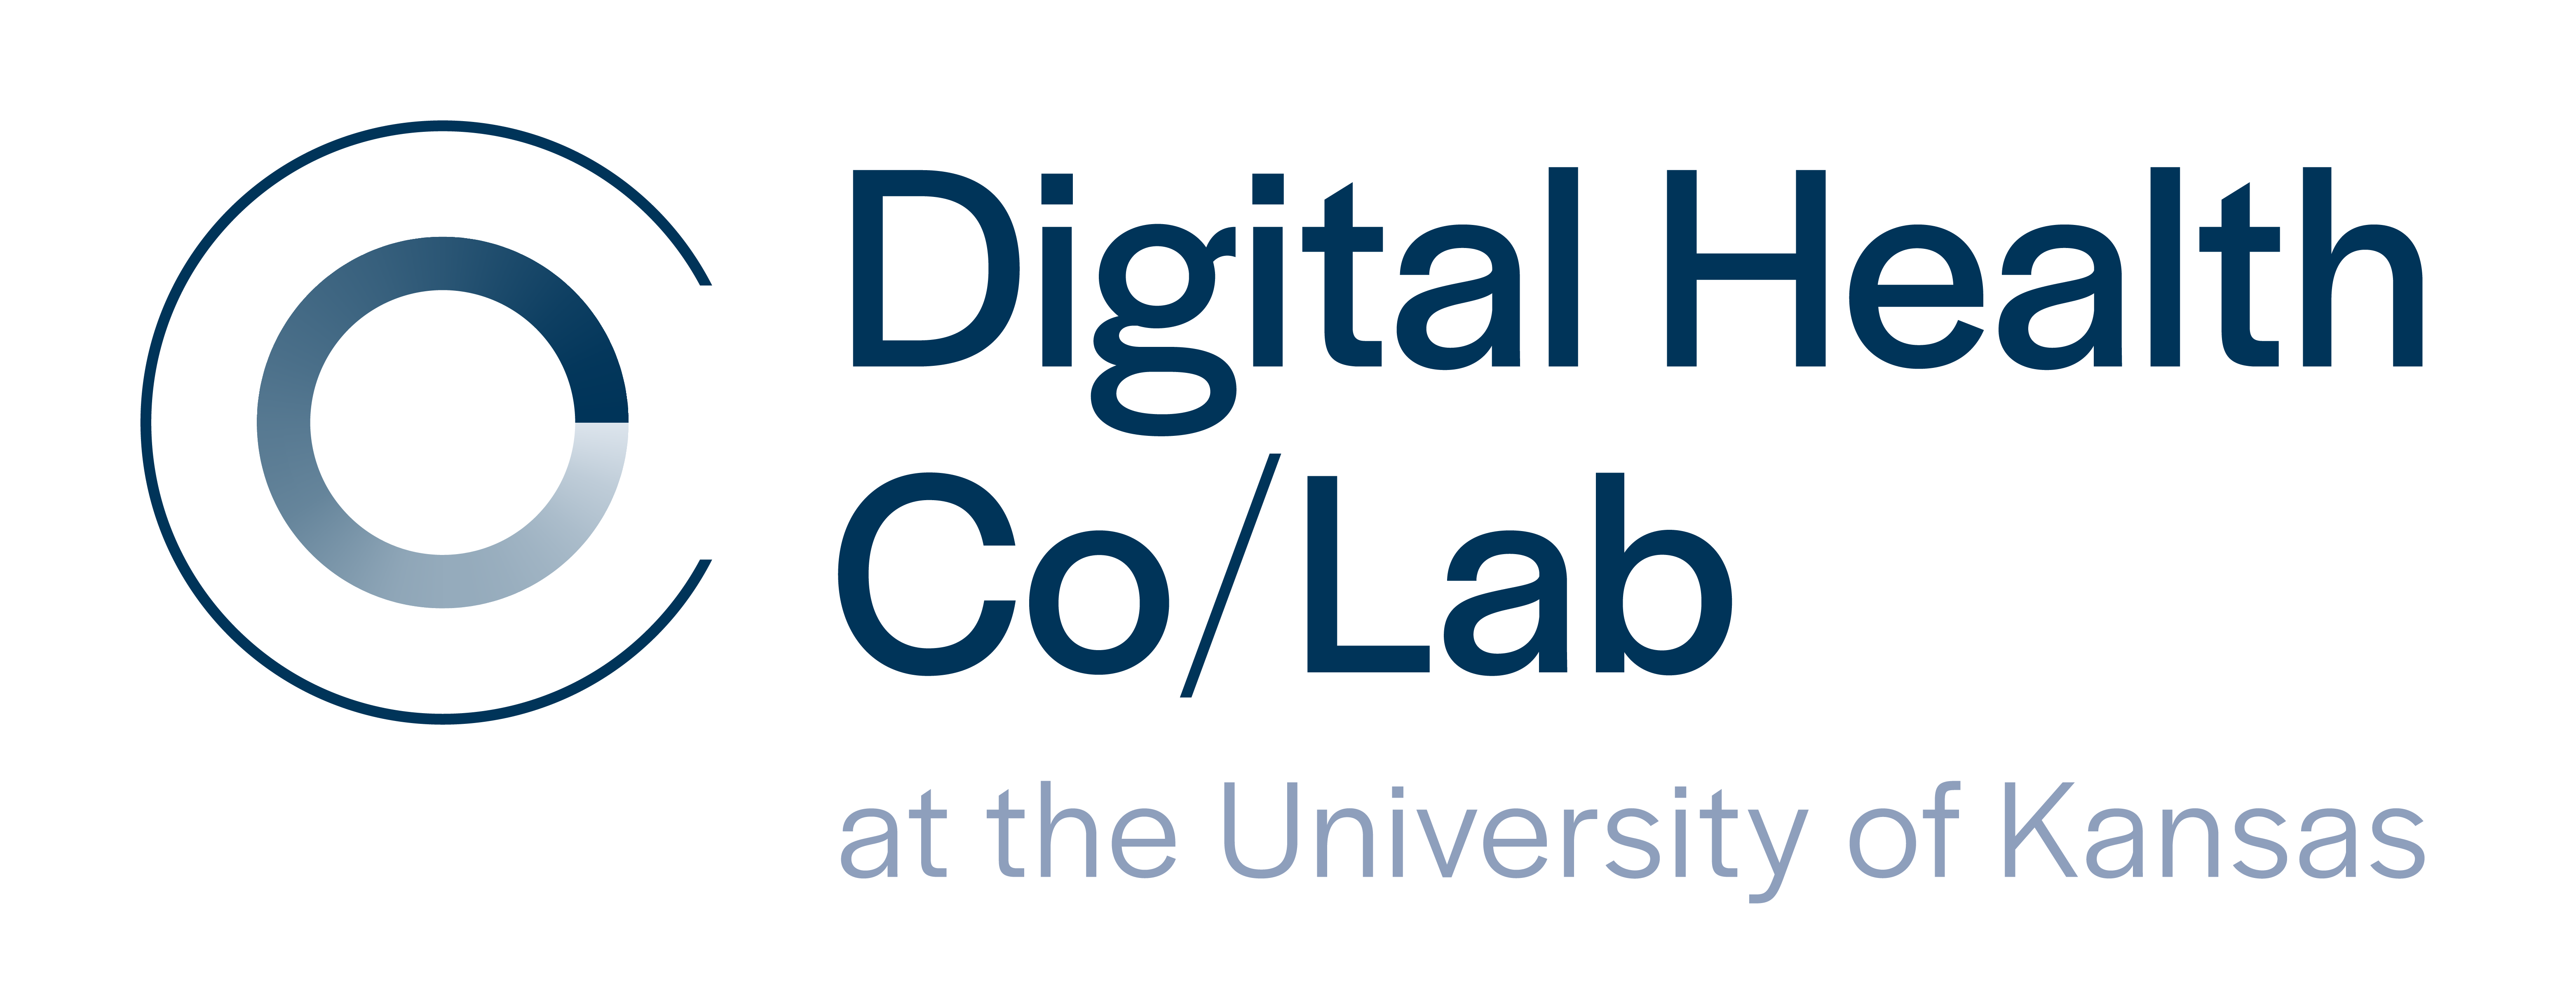 thin blue semi-circle with gradient inner circle logo for Digital Health Co-Lab at the University of Kansas